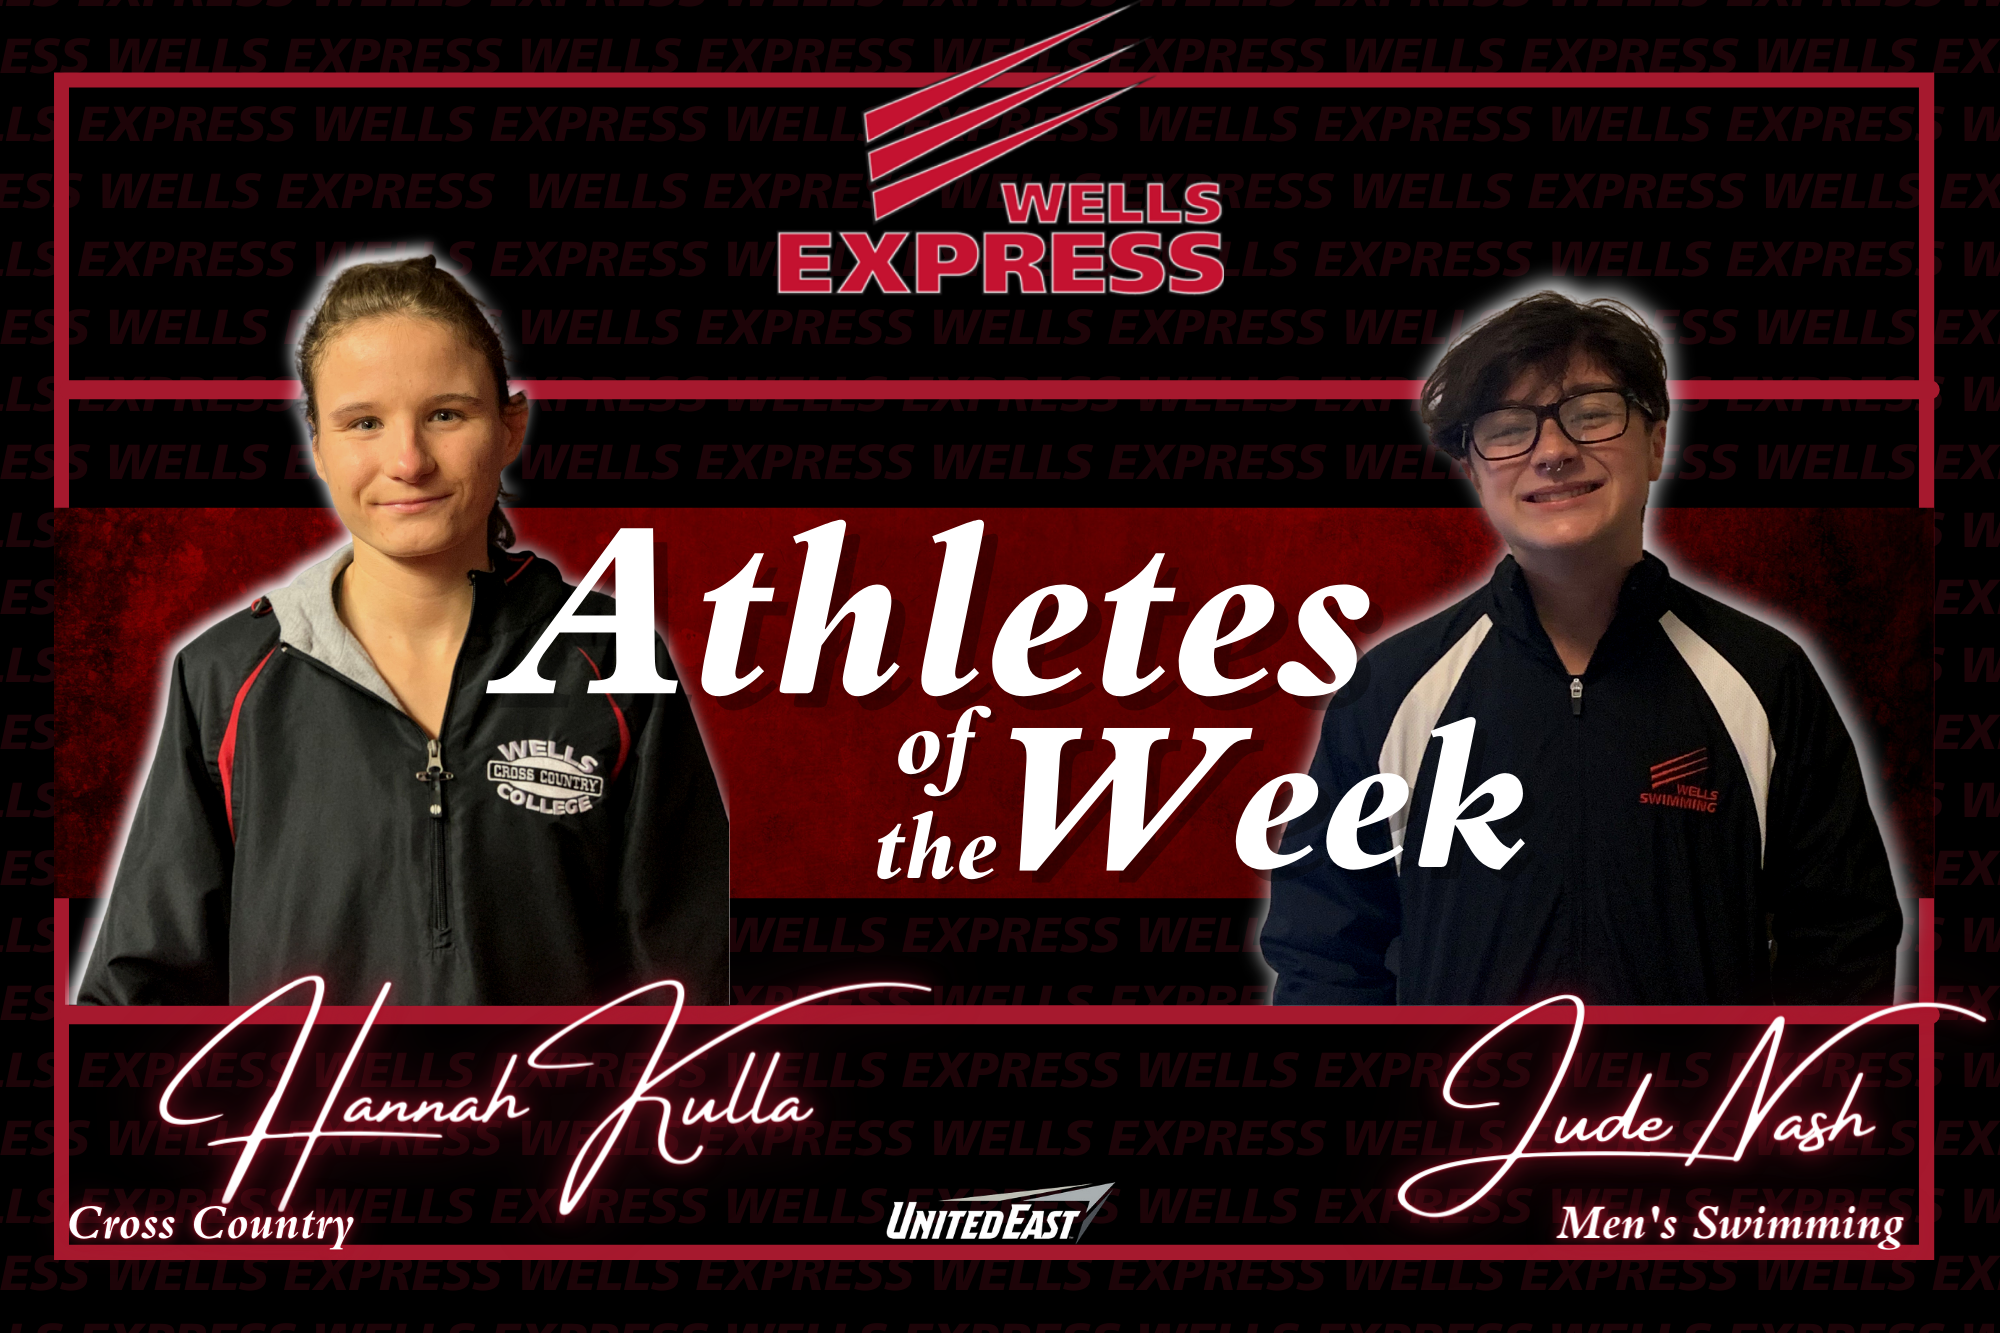 Wells Express Athletes of The Week 11/3